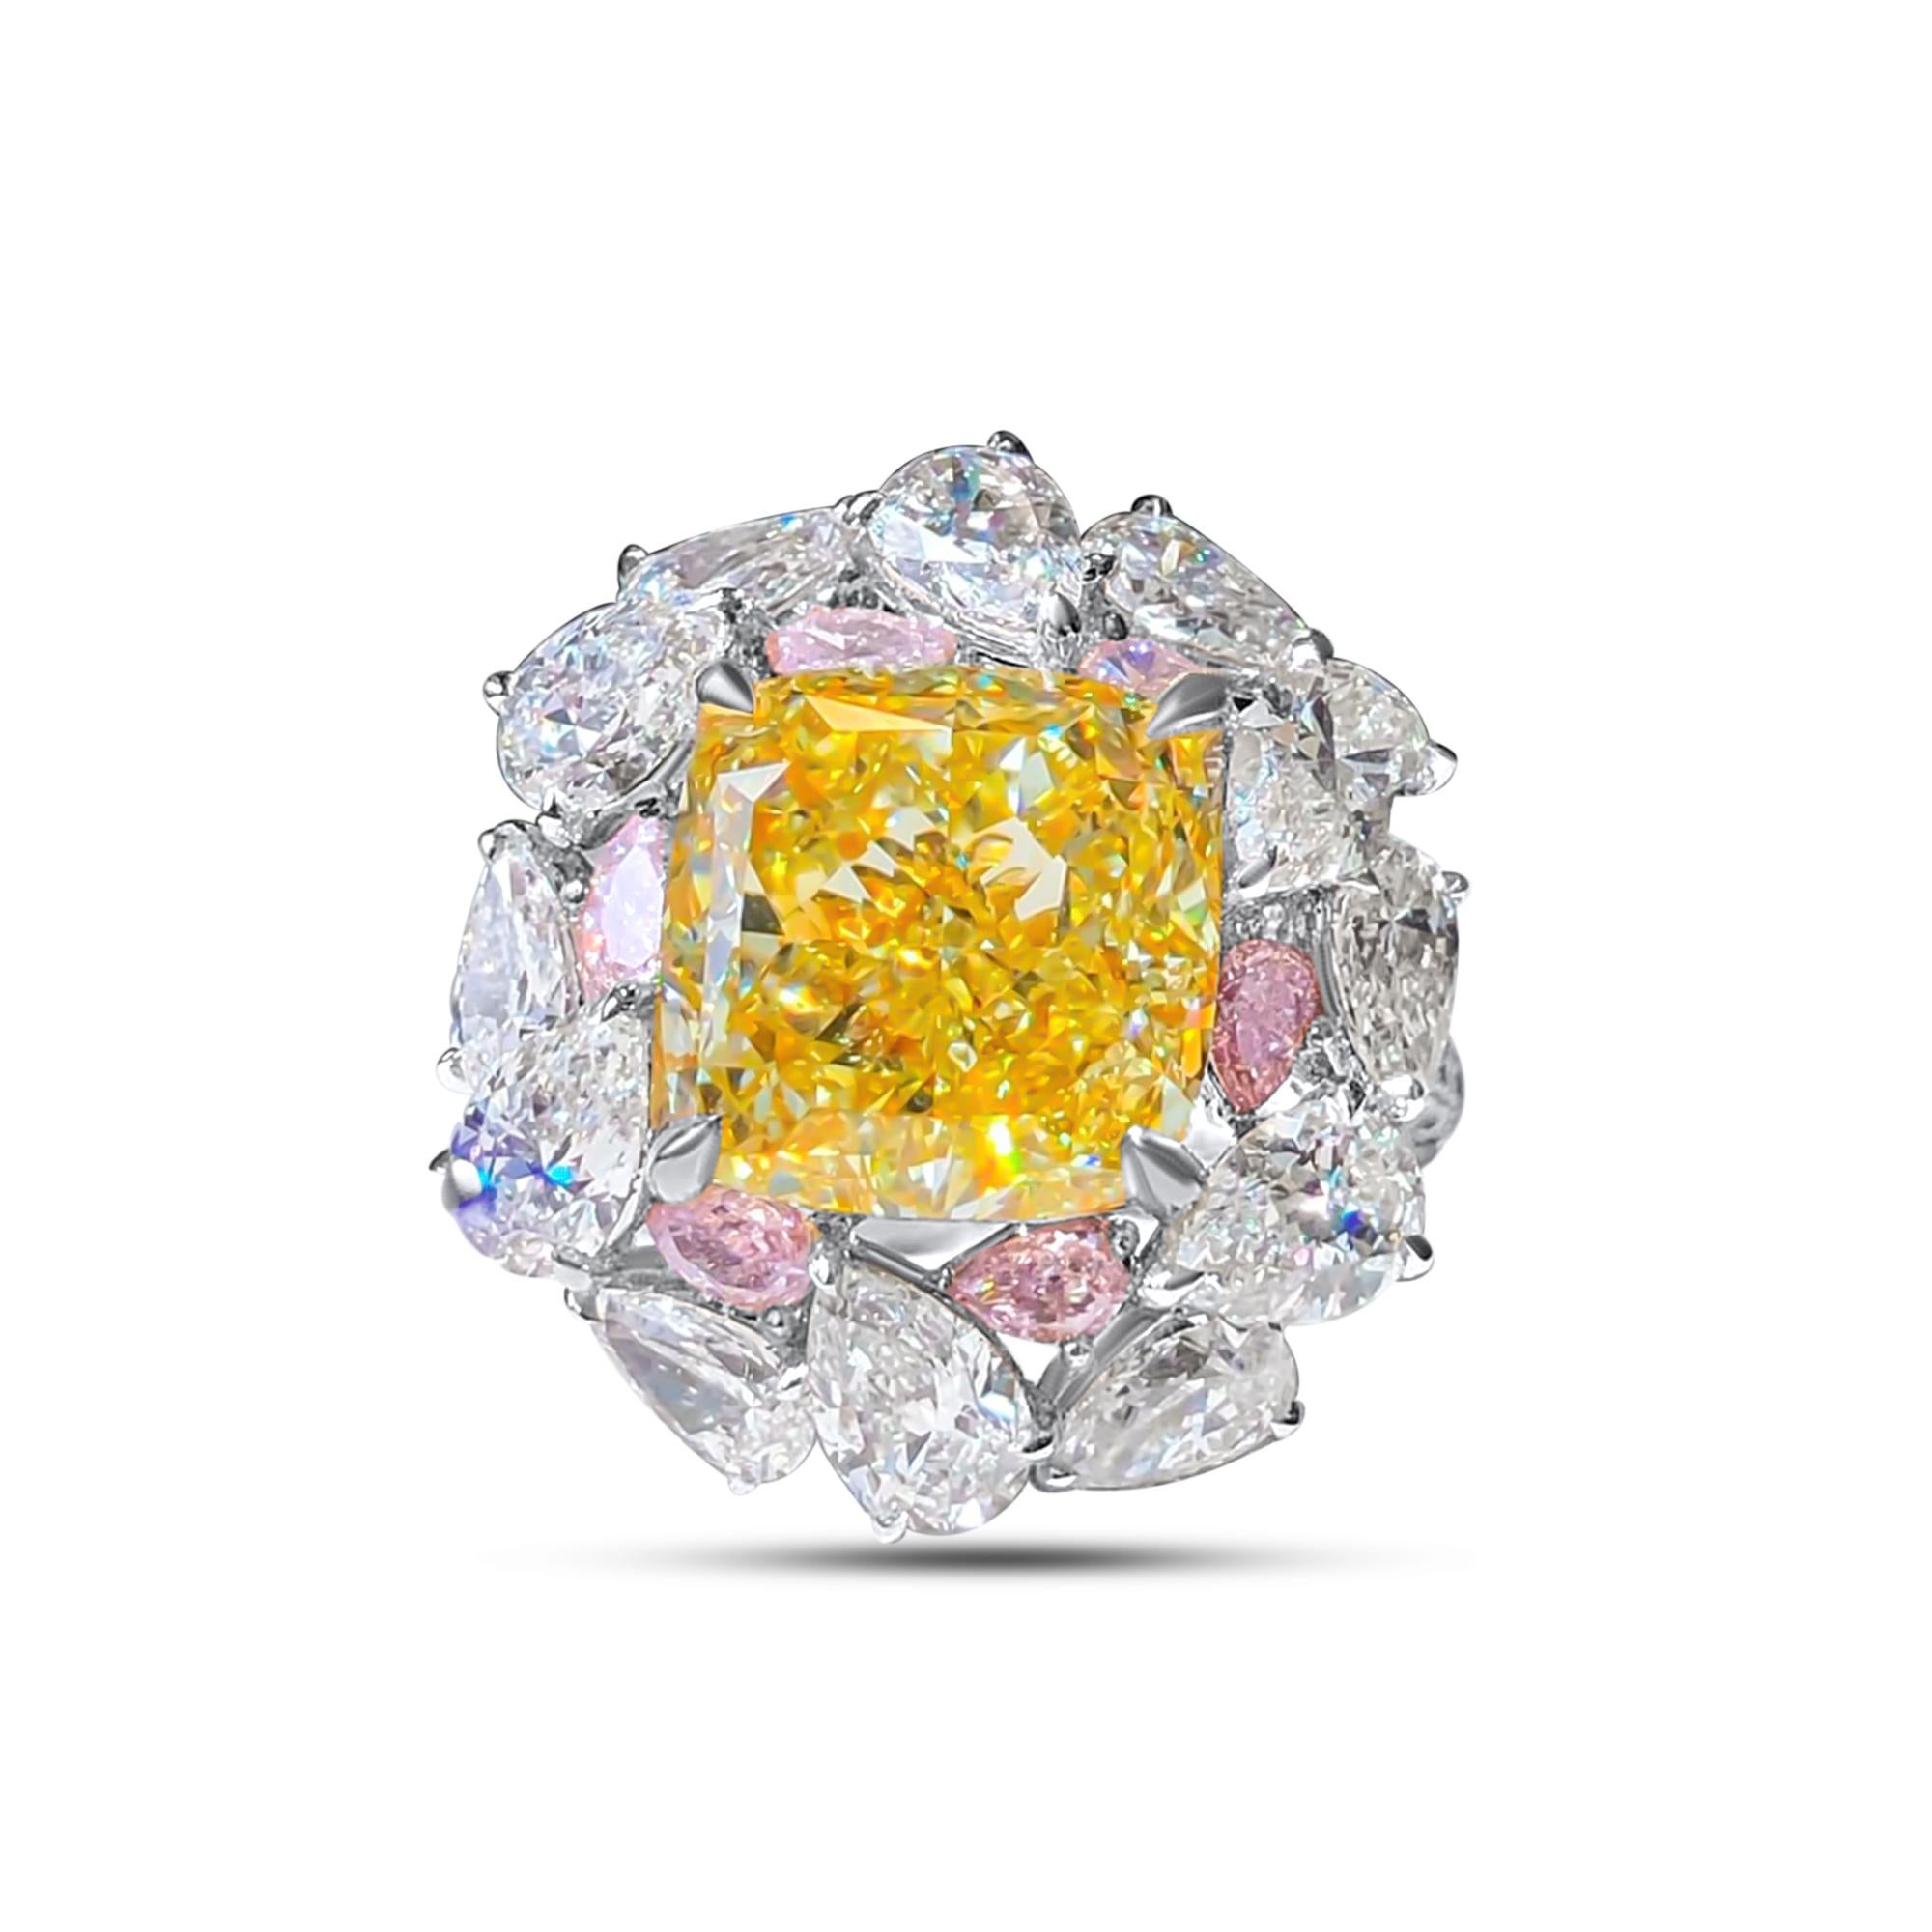 We invite you to discover this majestic ring set with a 7.01-carat GIA-certified Fancy Intense Yellow cushion-cut diamond accented with light pink and colorless pear-cut diamonds of 3 carats in total. The perfect cocktail ring 

New ring 
Main